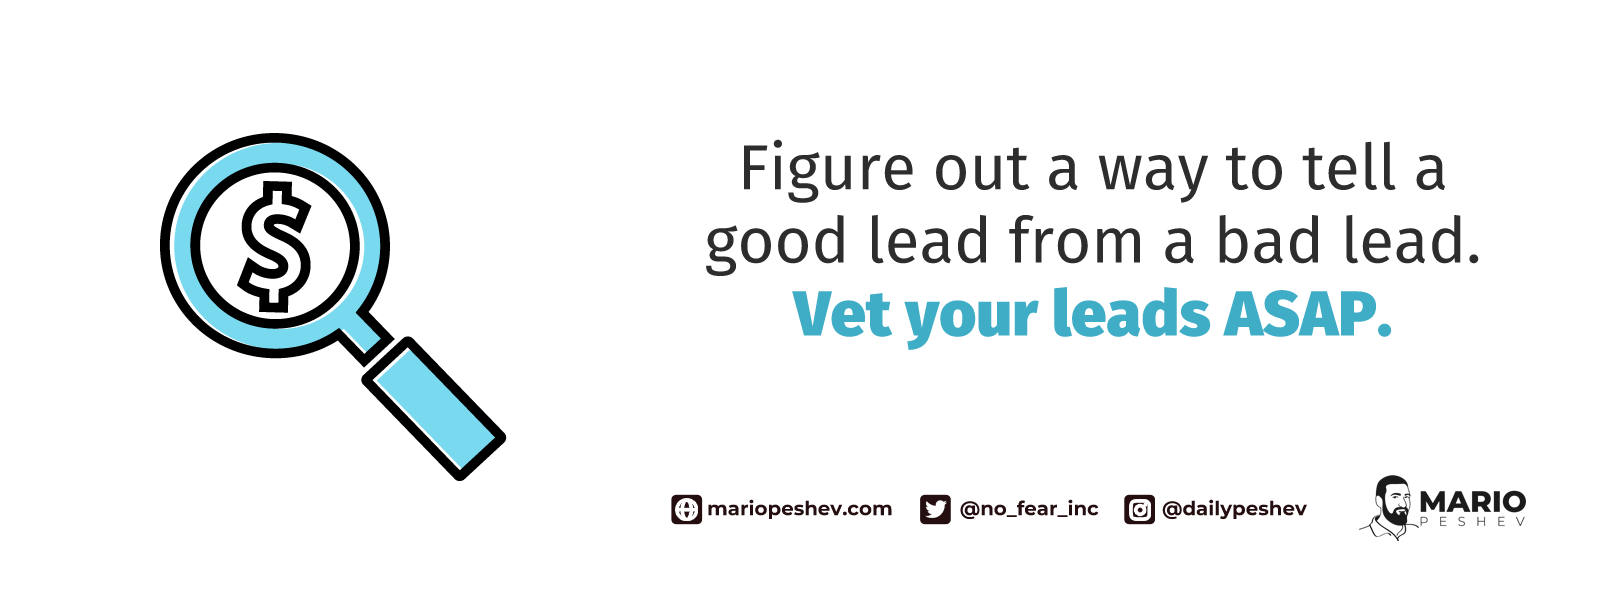 vetting your leads